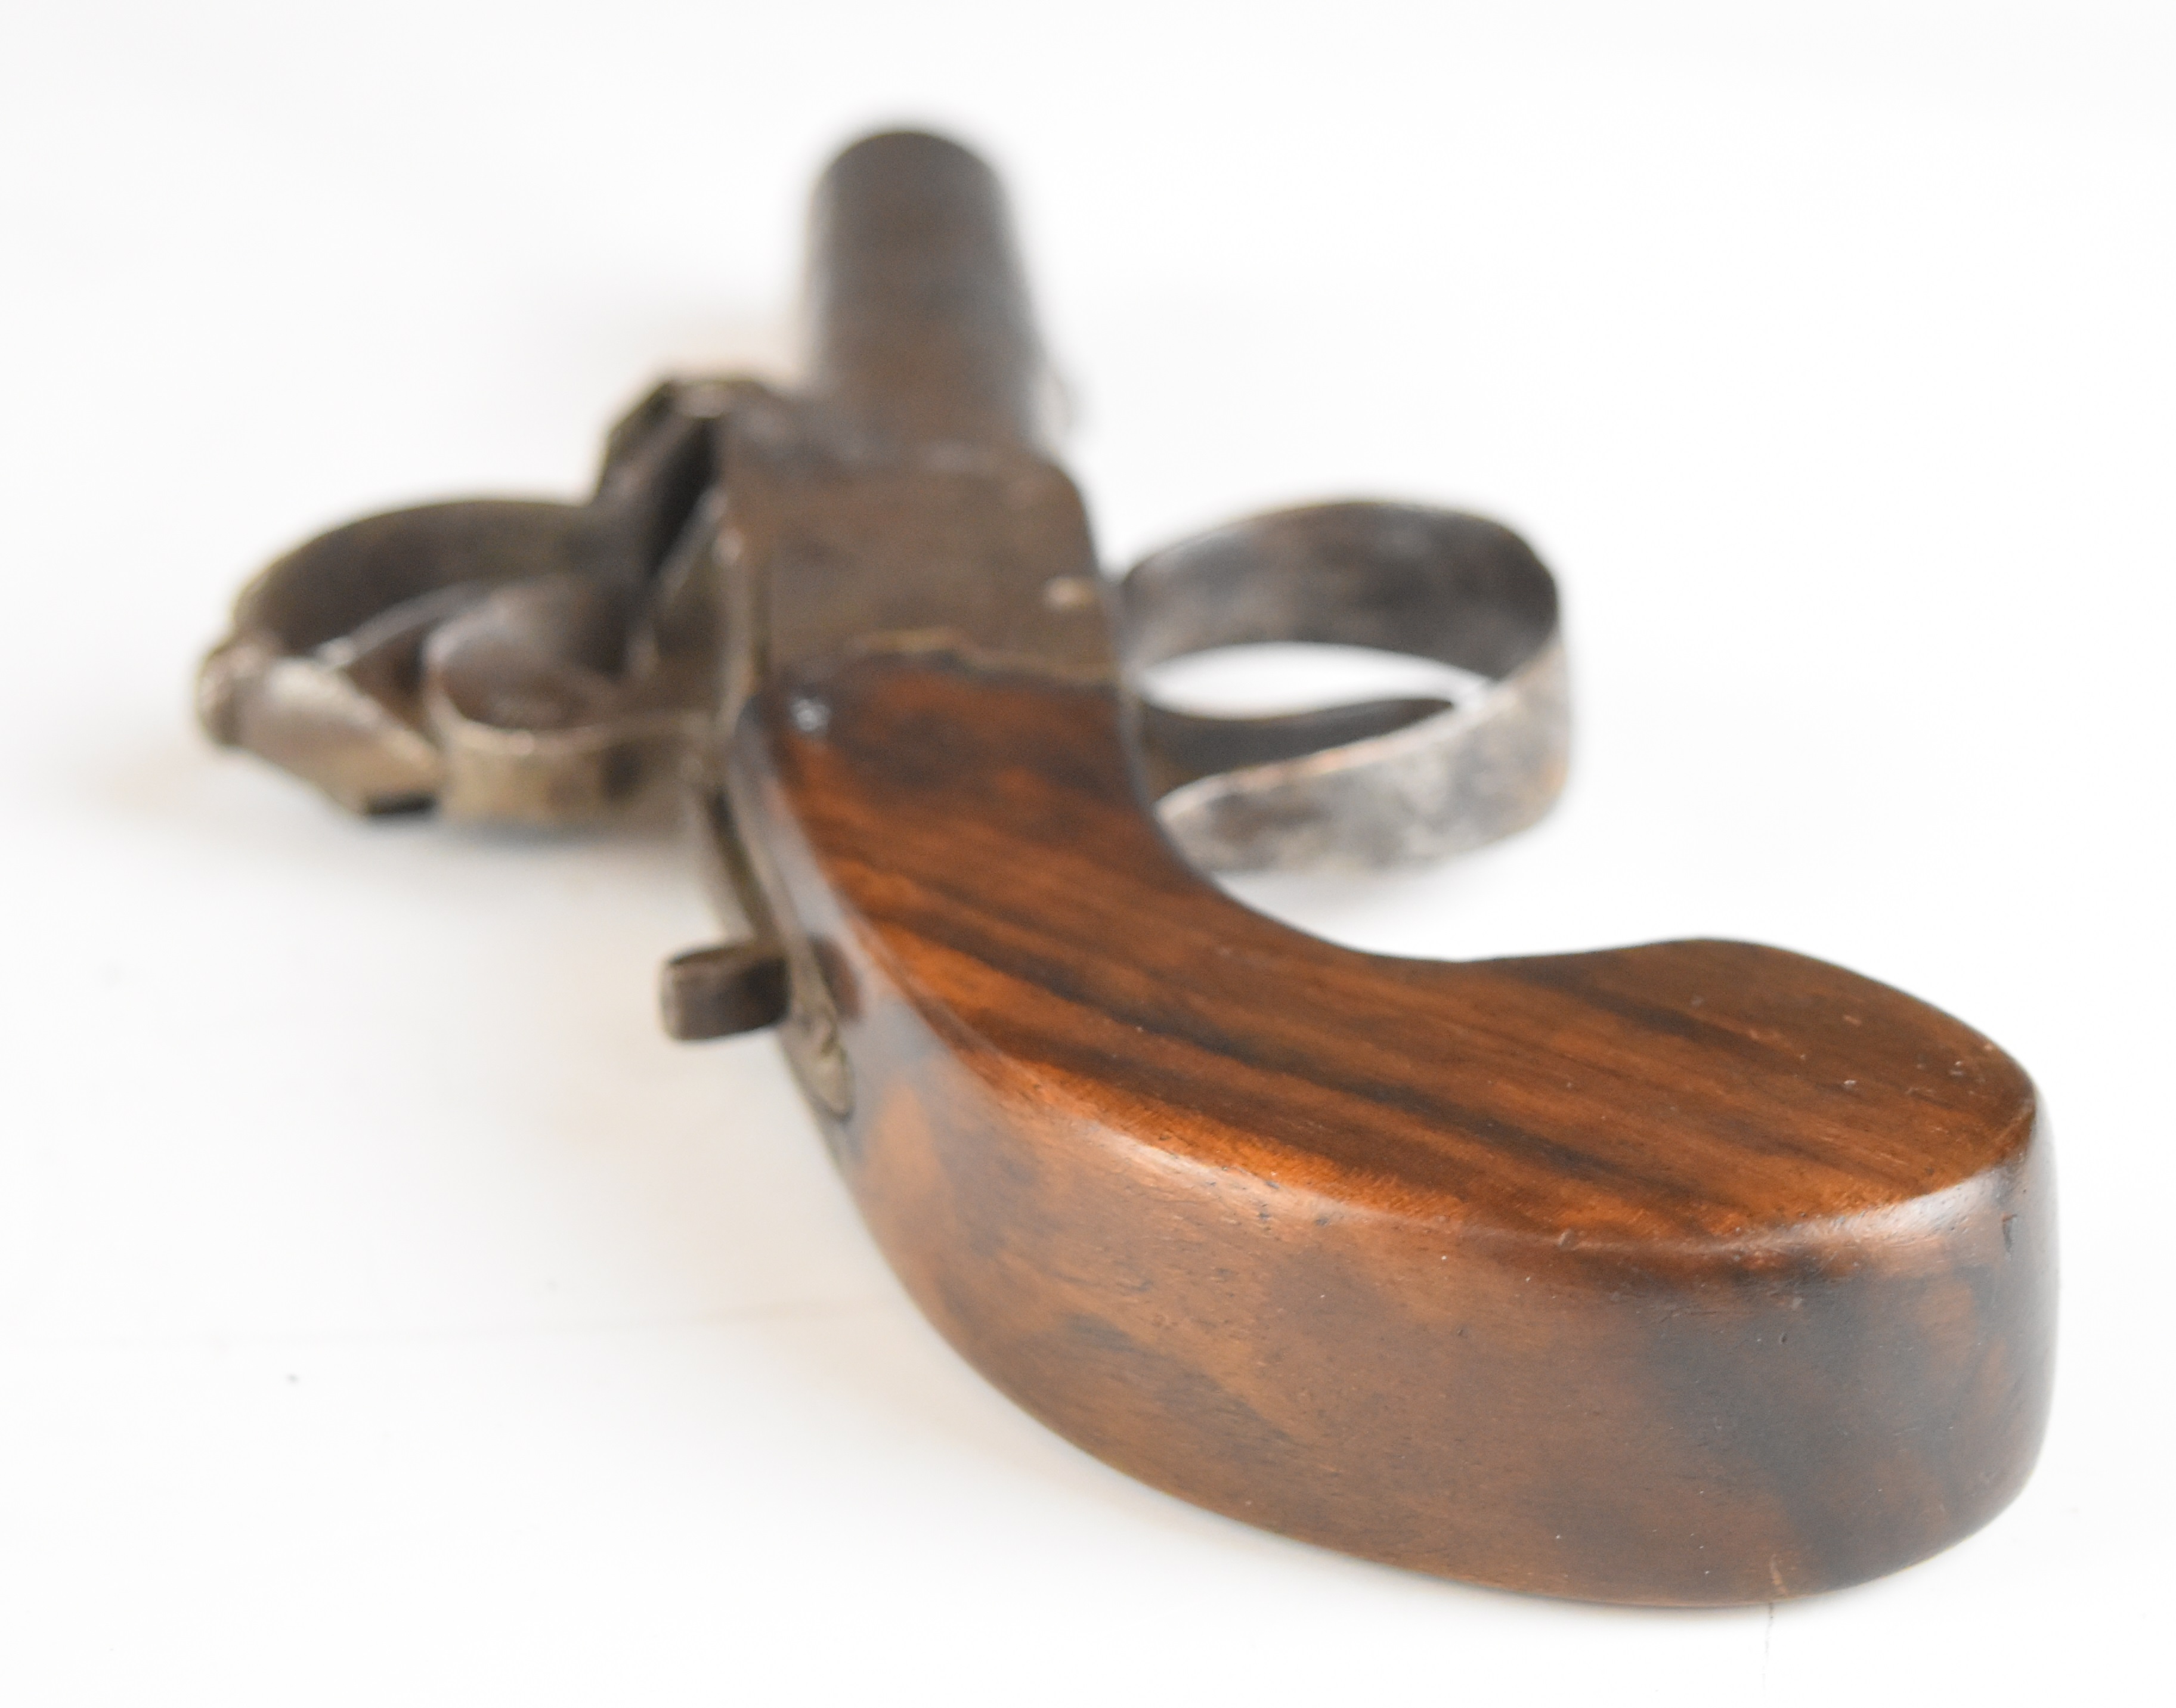 Unnamed 40 bore flintlock pocket pistol with engraved lock, wooden grip and 2 inch turn-off - Image 3 of 12